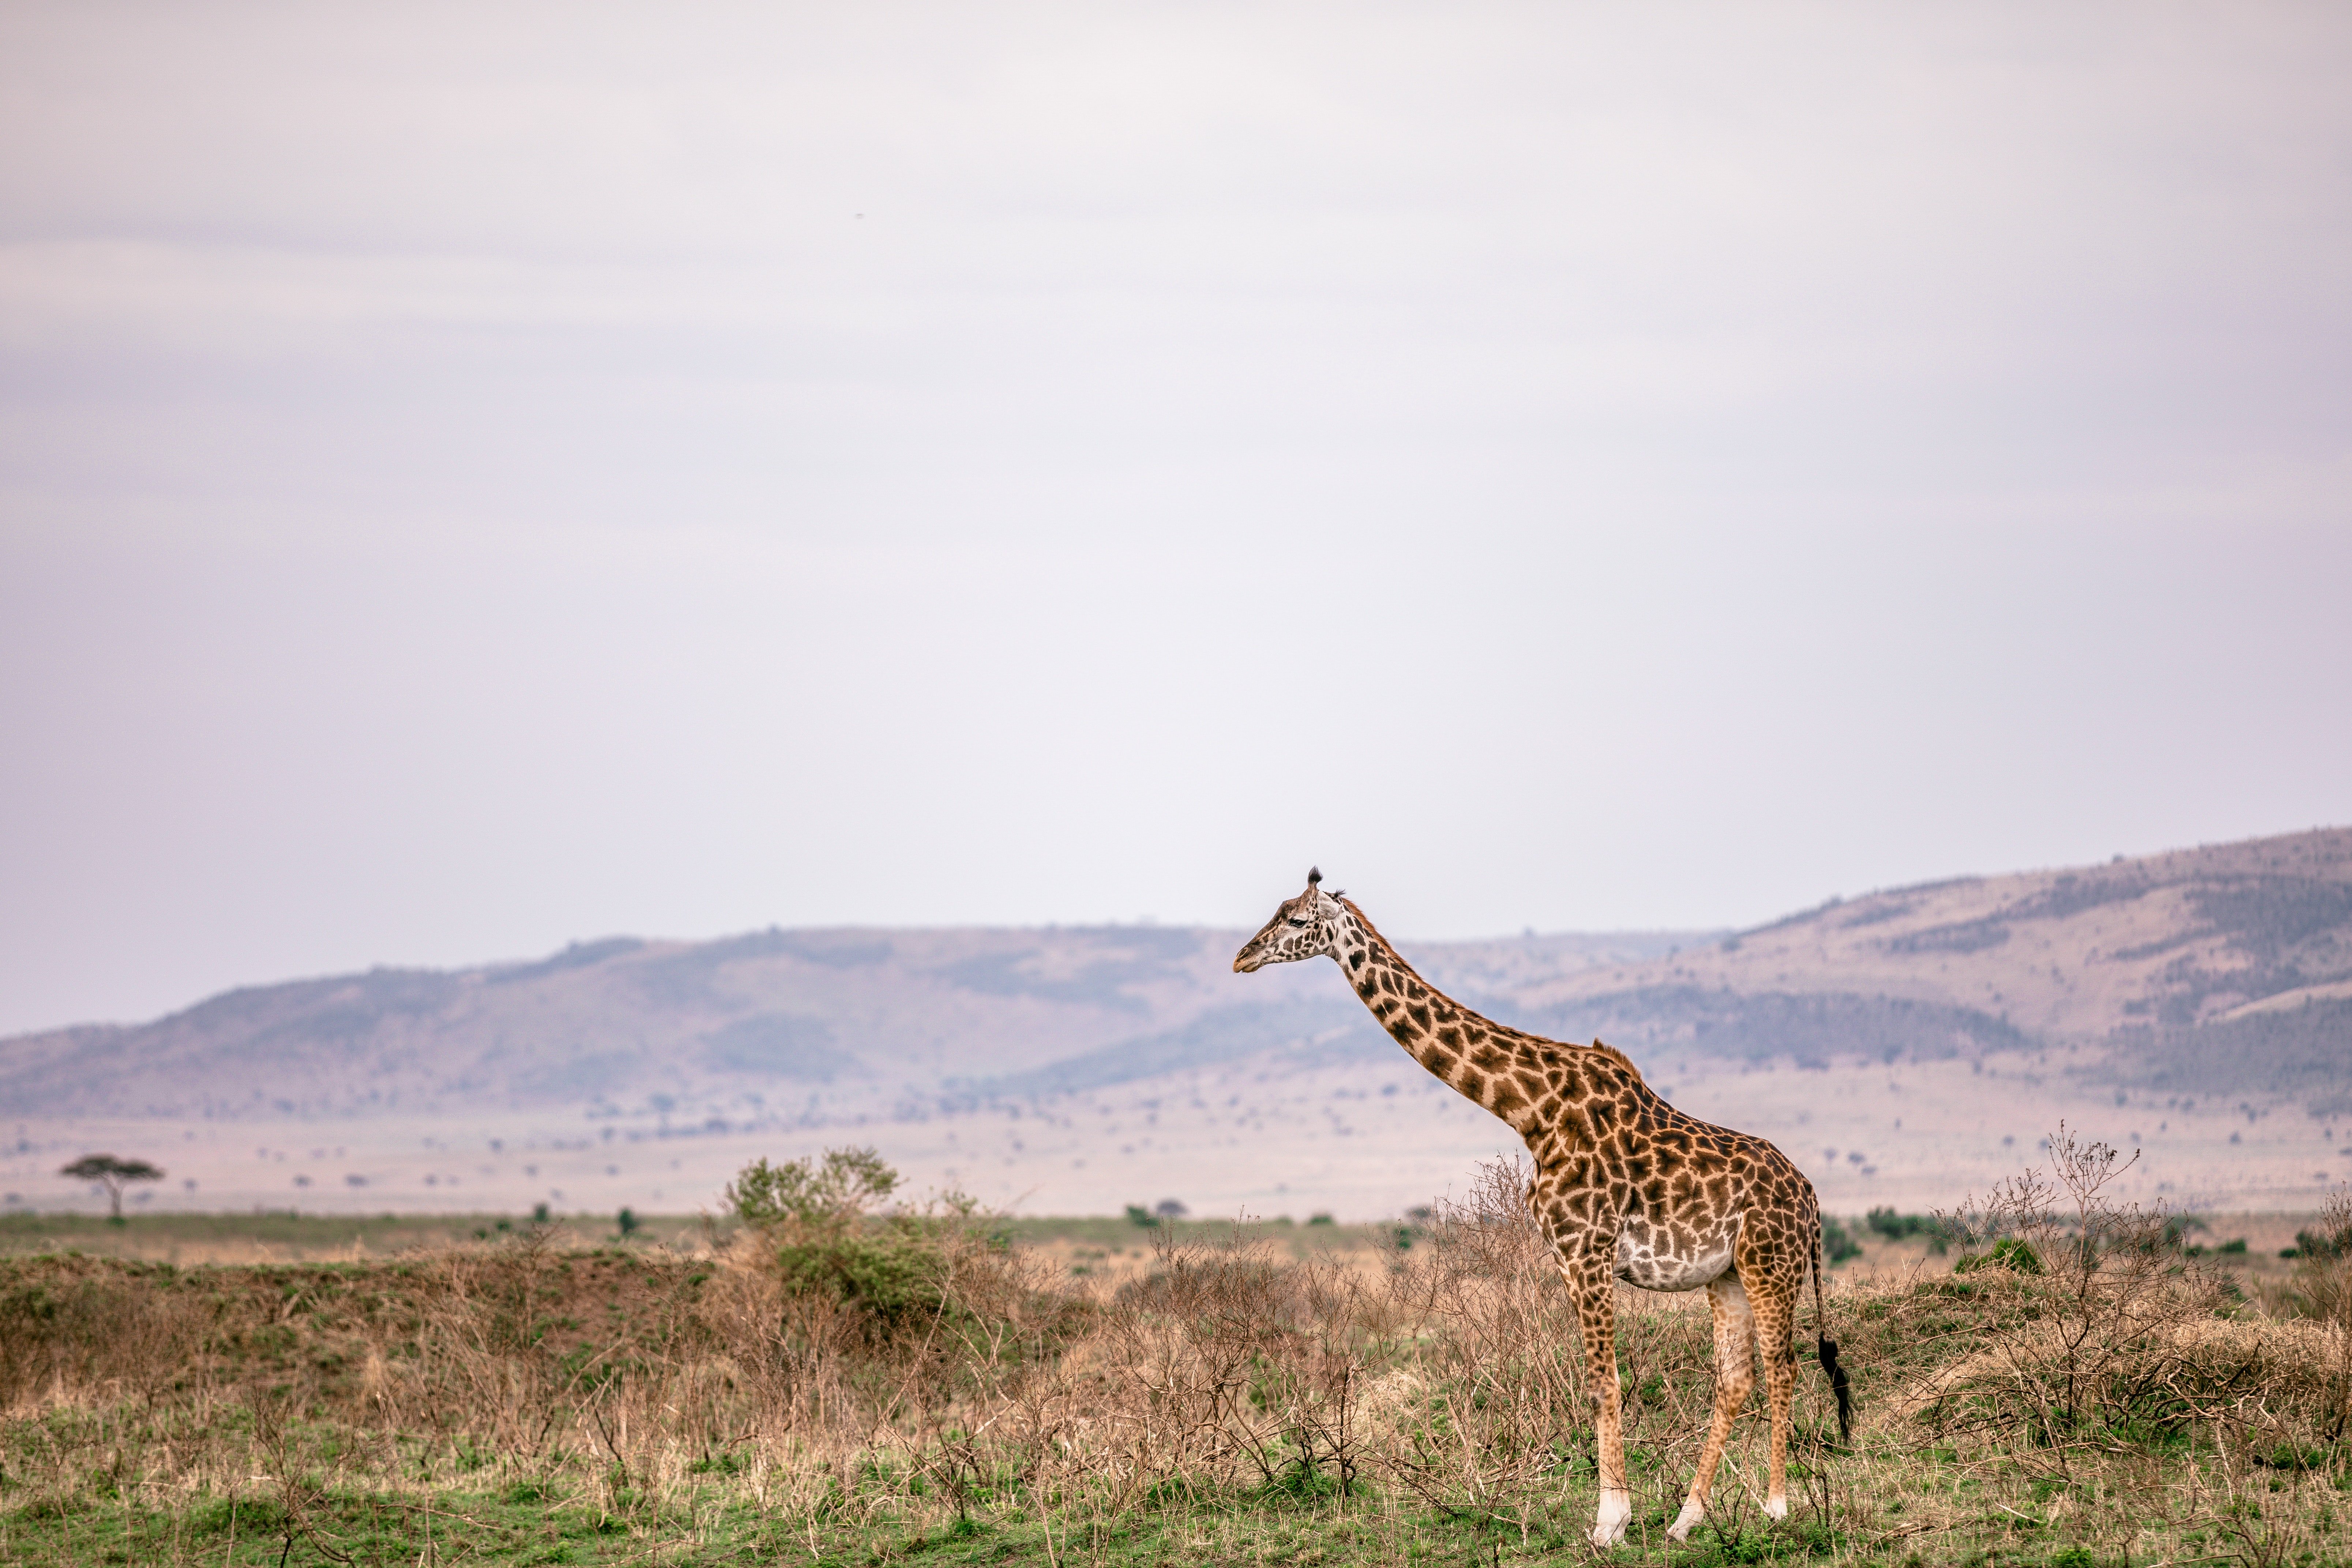 Pictured - An image of a giraffe standing on a grassy meadow | Source: Pexels 